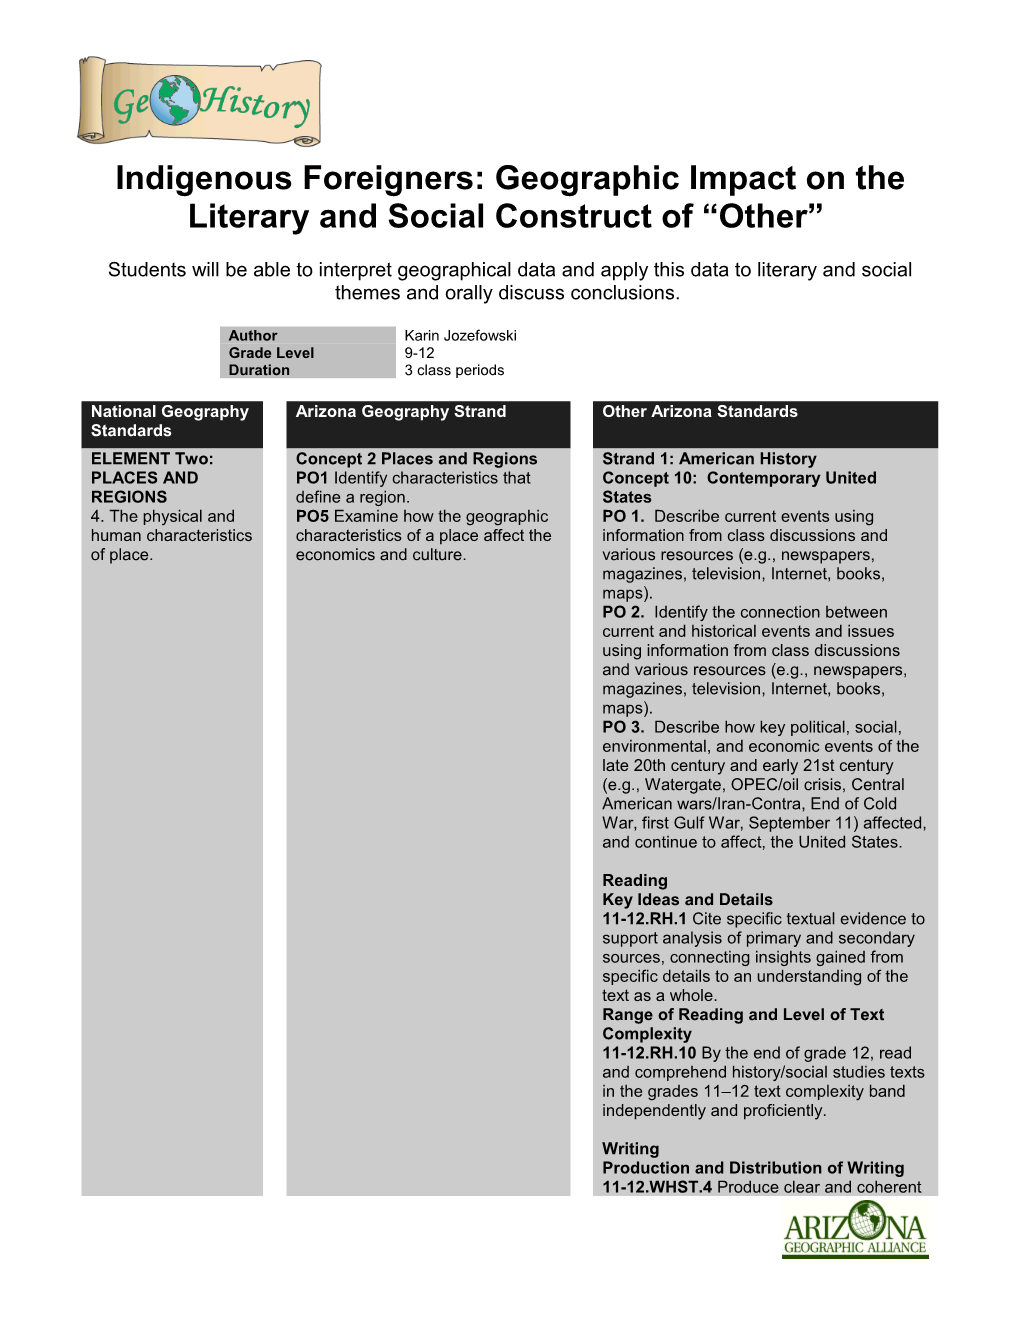 Indigenous Foreigners: Geographic Impact on the Literary and Social Construct of Other